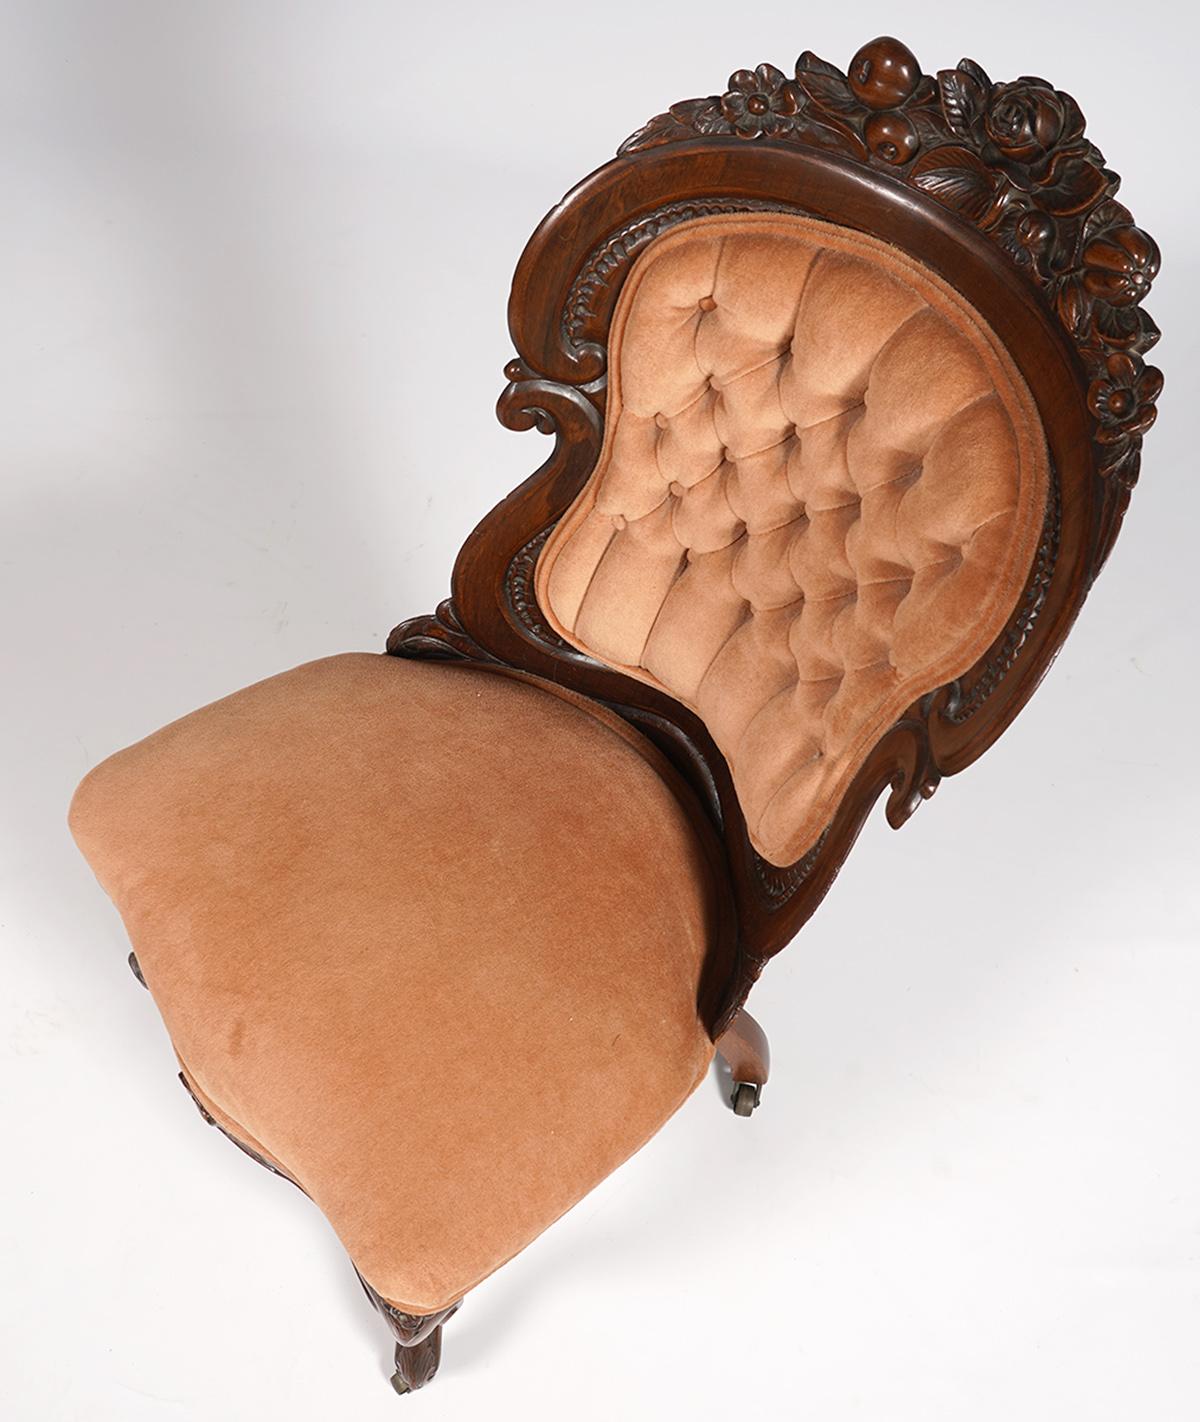 Fabric JH Belter Laminated Rococo Revival Henry Clay Pattern Slipper Chair, circa 1860